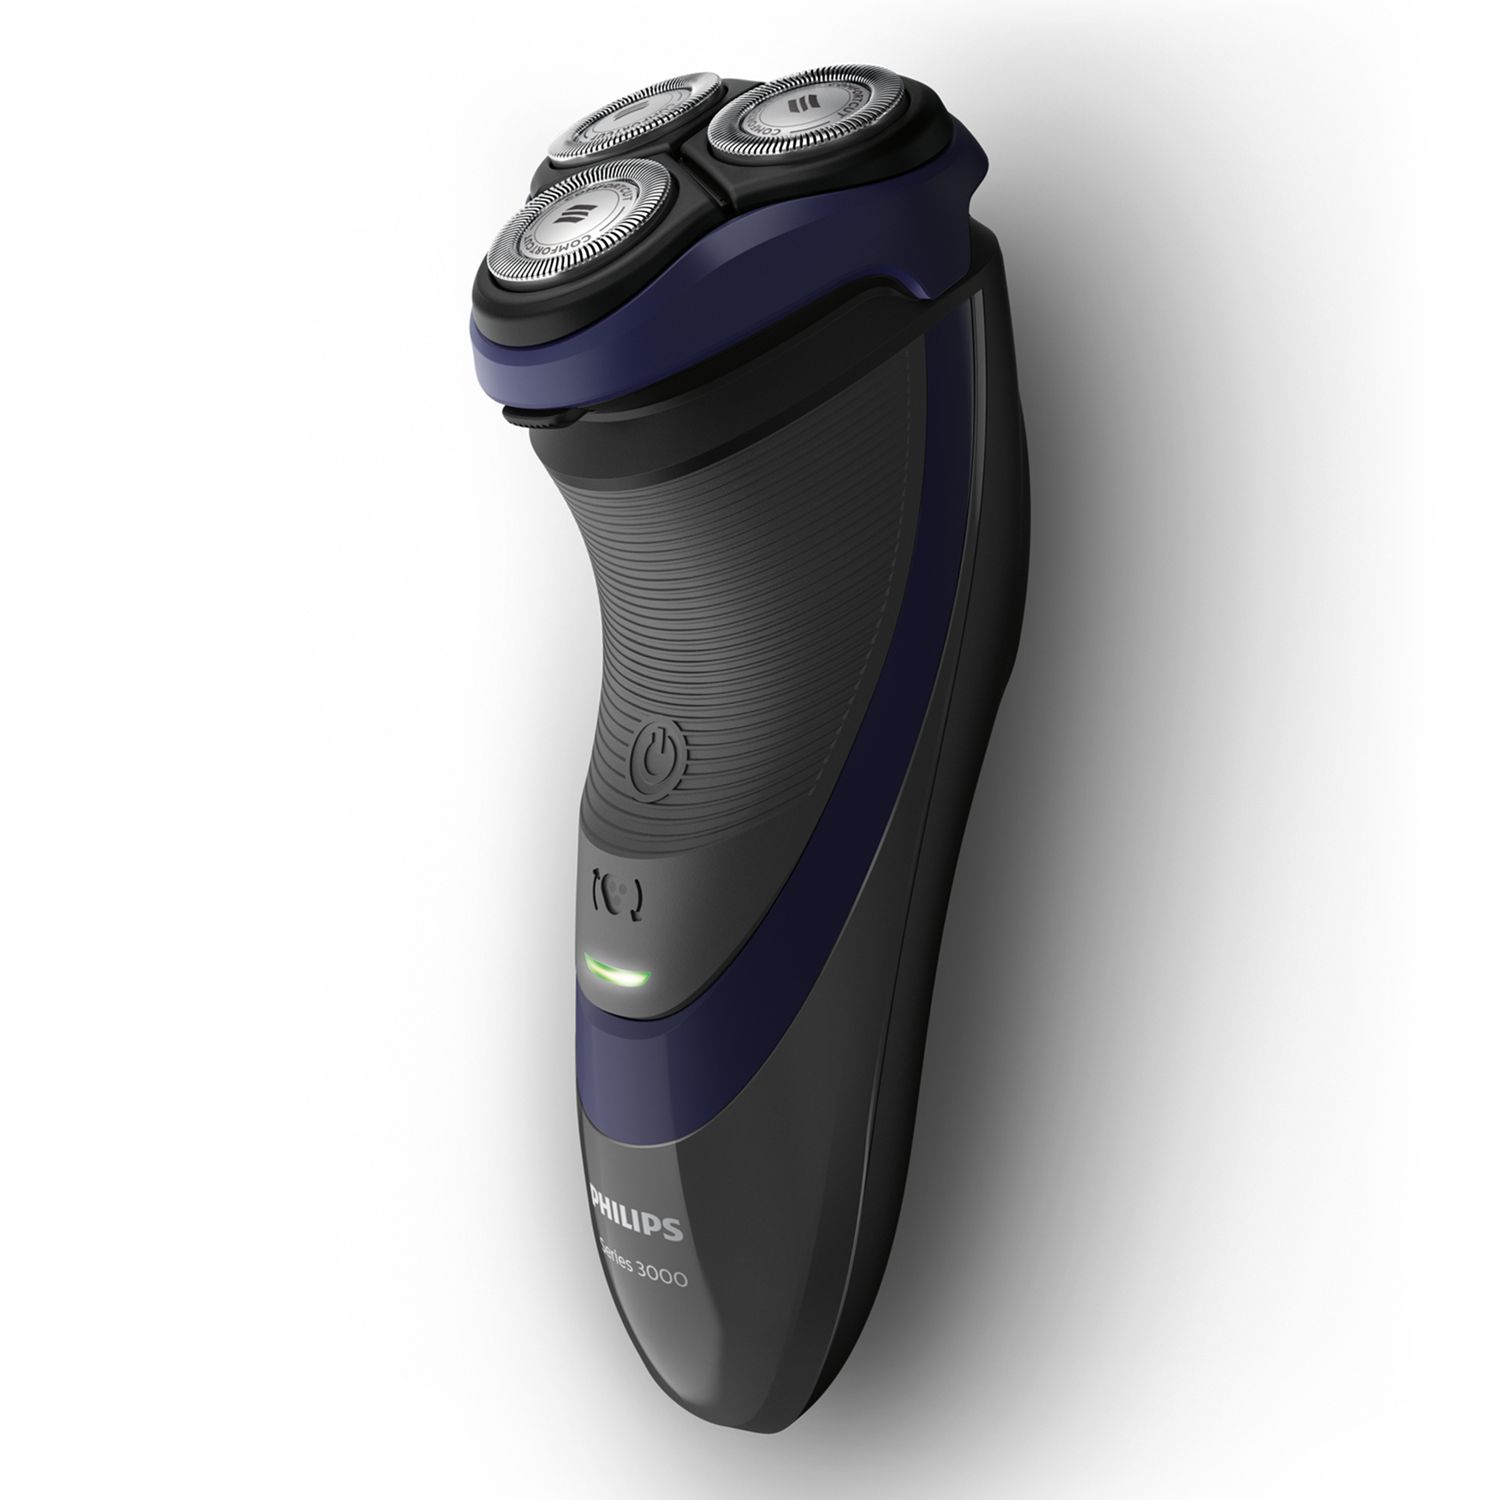 Image result for Philips Series 3000 Dry Electric Shaver (S3120/06)